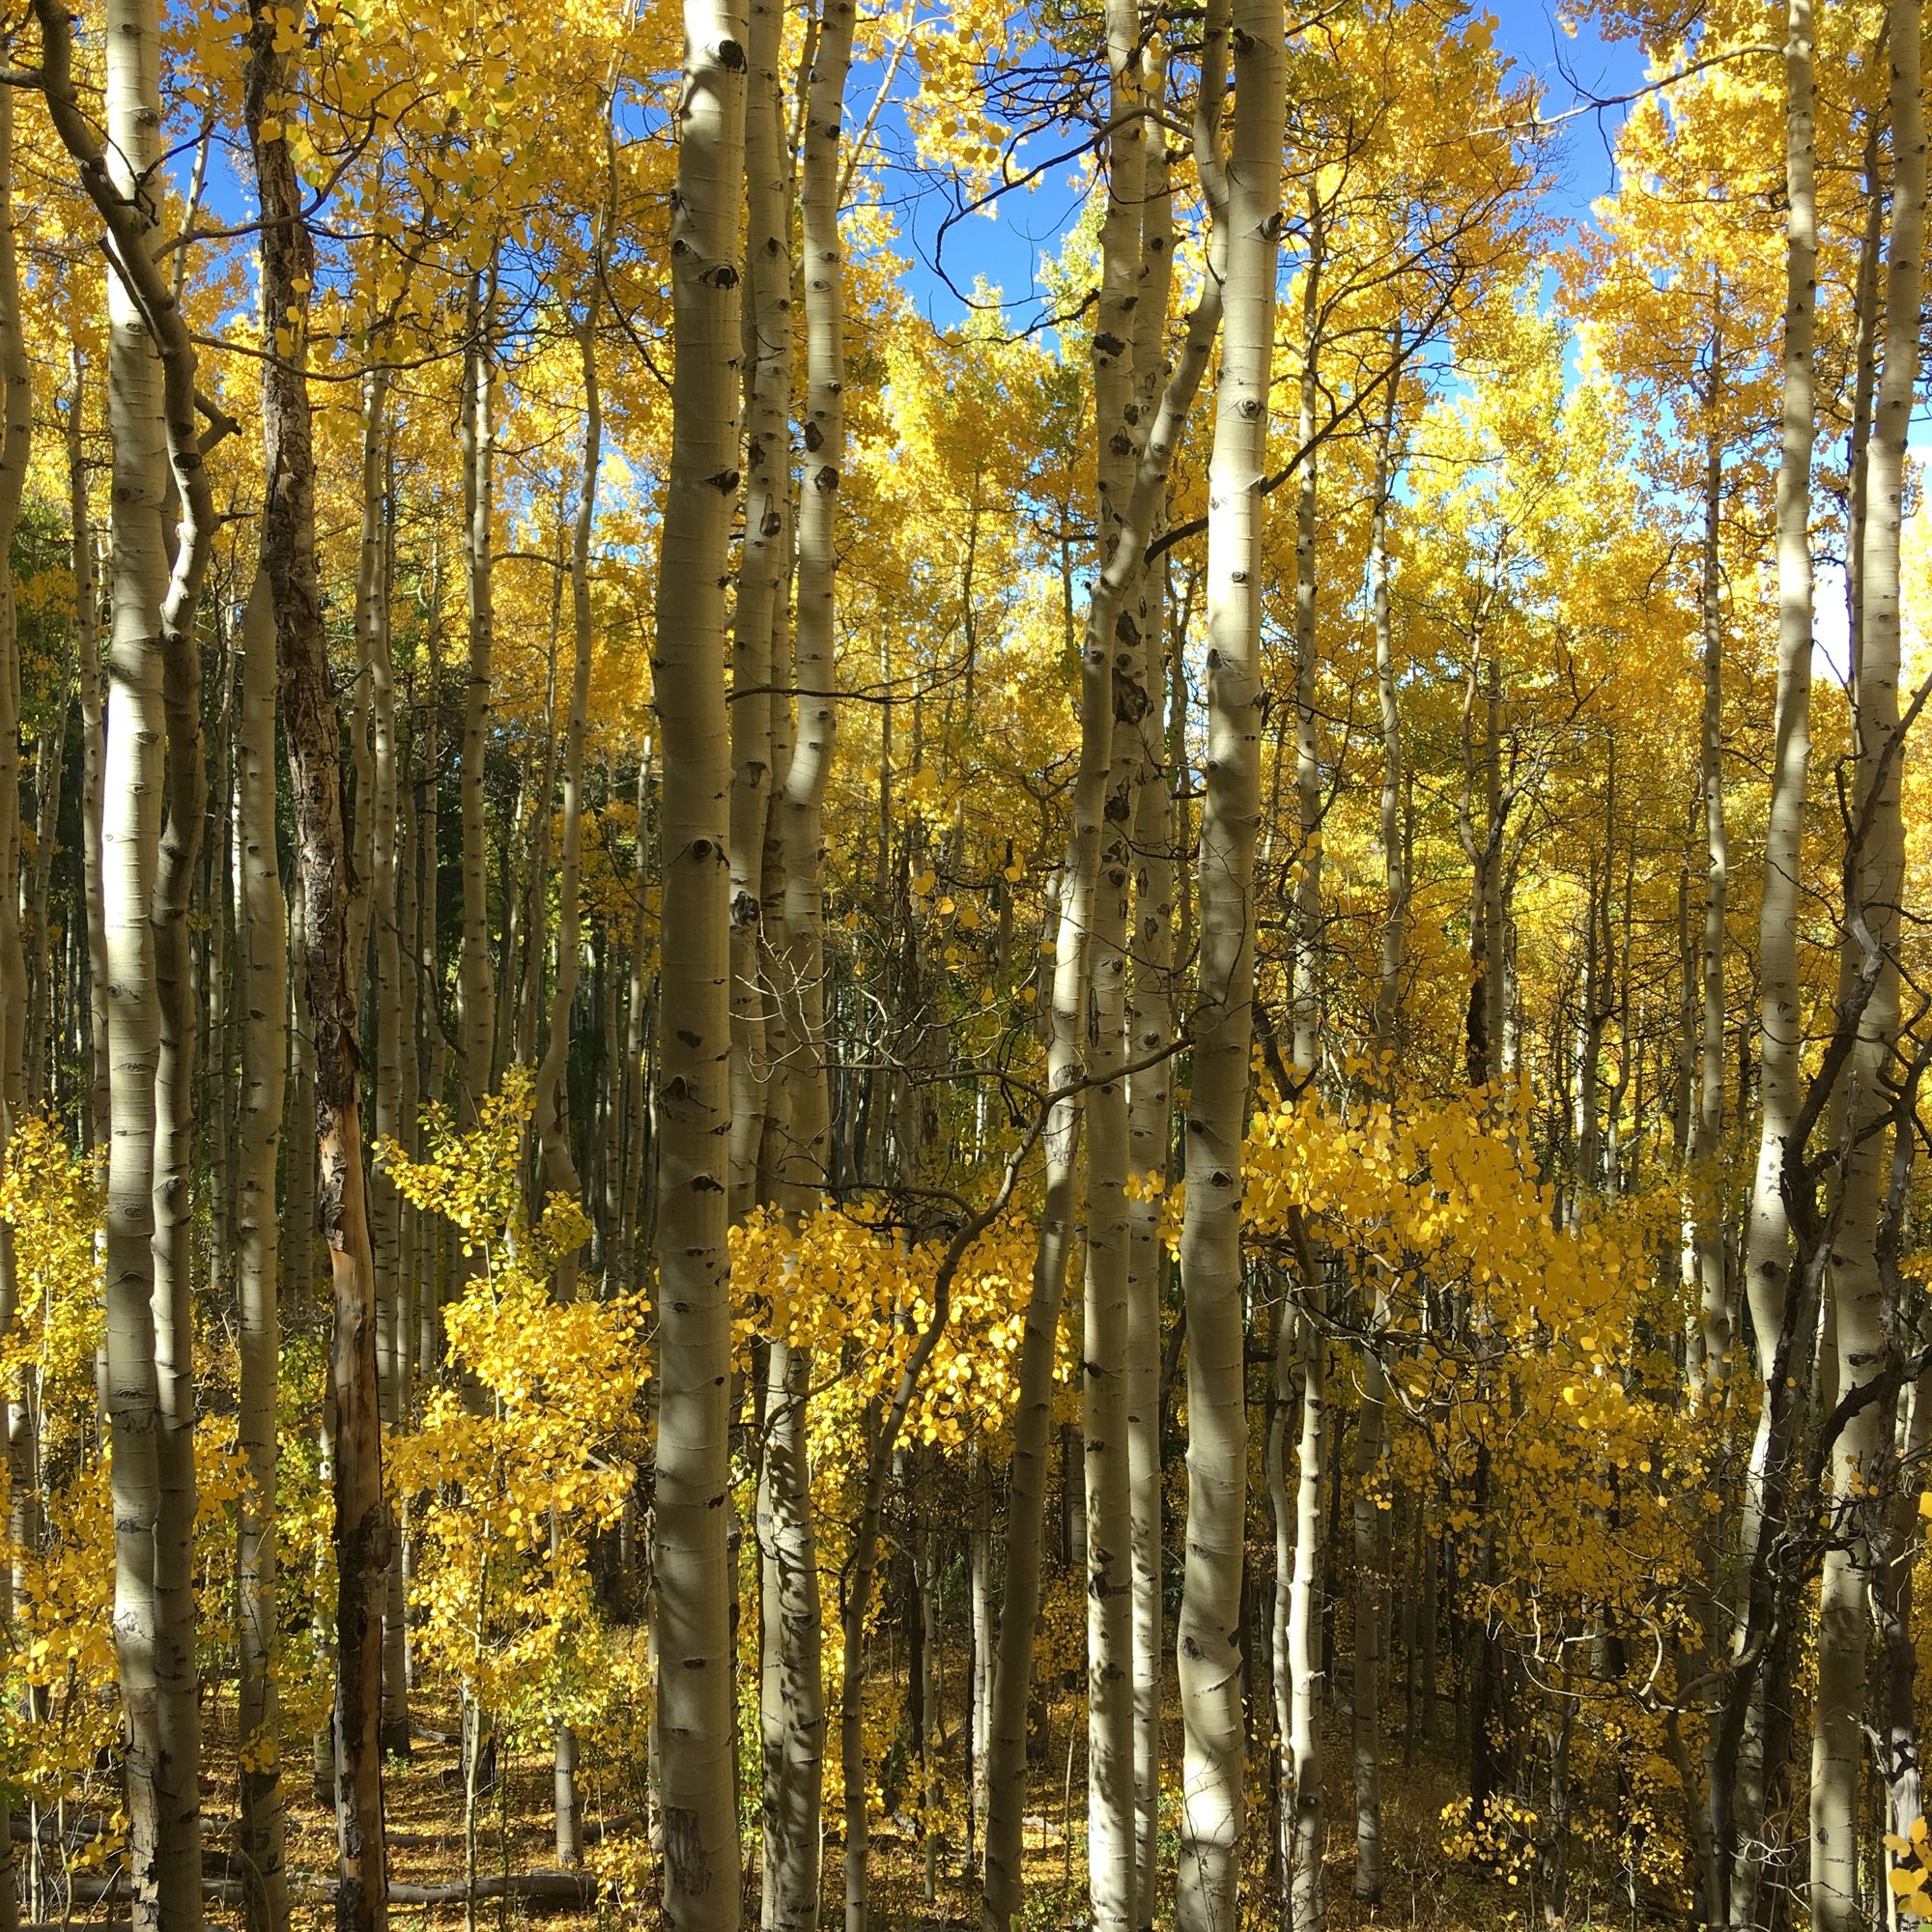 a photo looking through an aspen grove in fall, the golden yellow leaves contrasted with the white and black of the tree trunks